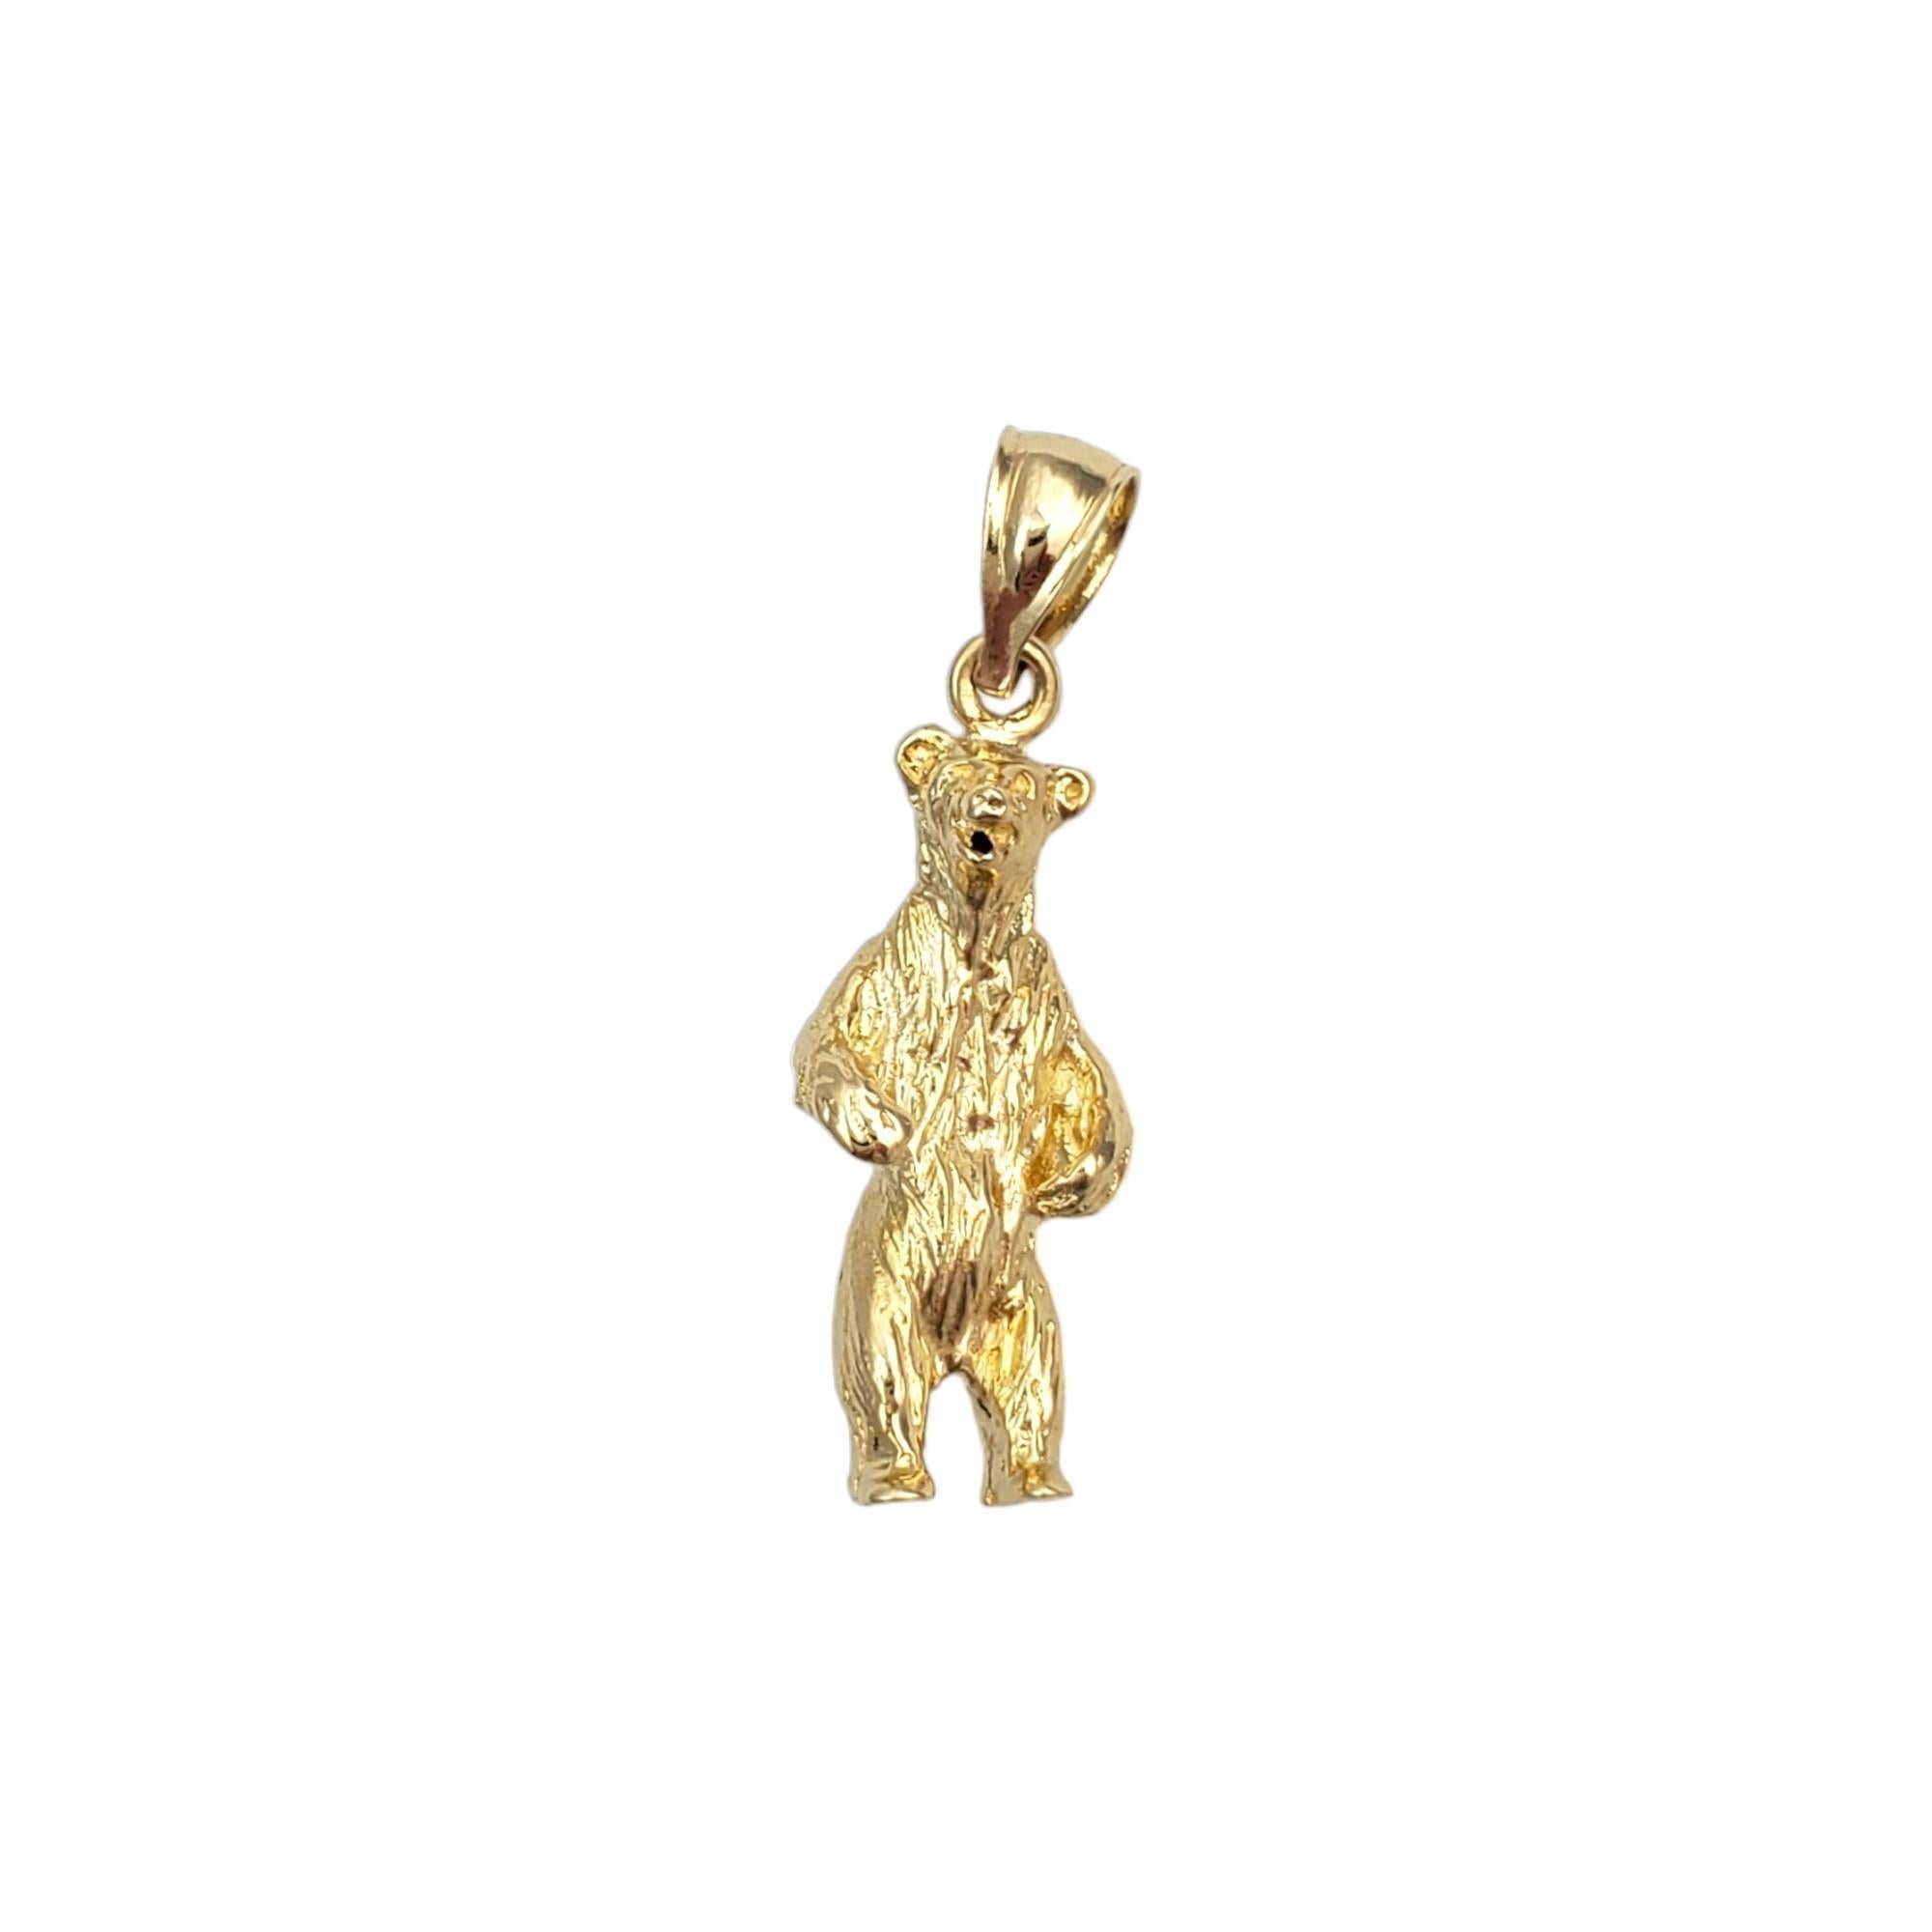 Vintage 14 karat yellow gold Bear charm -

This miniature bear charm captures the essence of strength and wilderness, and is beautifully crafted in 14K yellow gold.

Size: 20.58mm x 8.8mm

Stamped: 14K D2

Weight: 3.58 gr./ 2.30 dwt.

Chain not